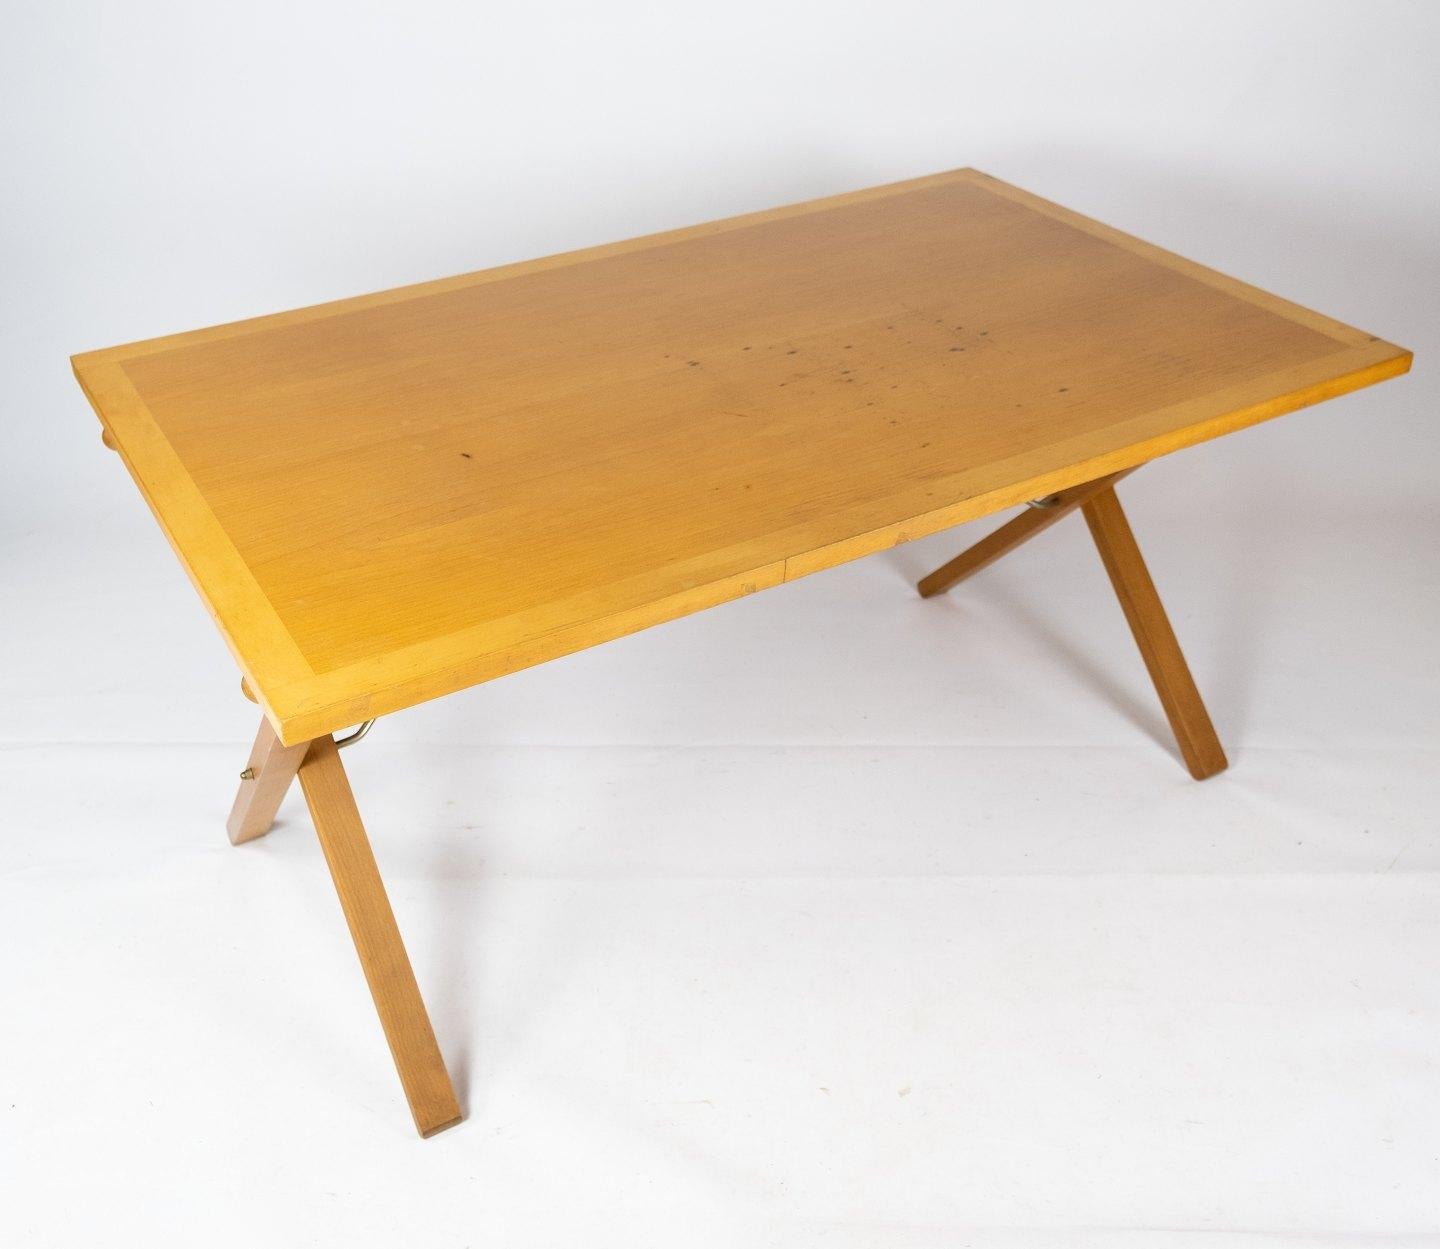 This dining table is a true gem of Danish furniture design and clearly bears the stamp of Paul Cadovius' unique vision and talent. Manufactured by the renowned company Cado in the 1960s, this table represents the best in Danish craftsmanship and